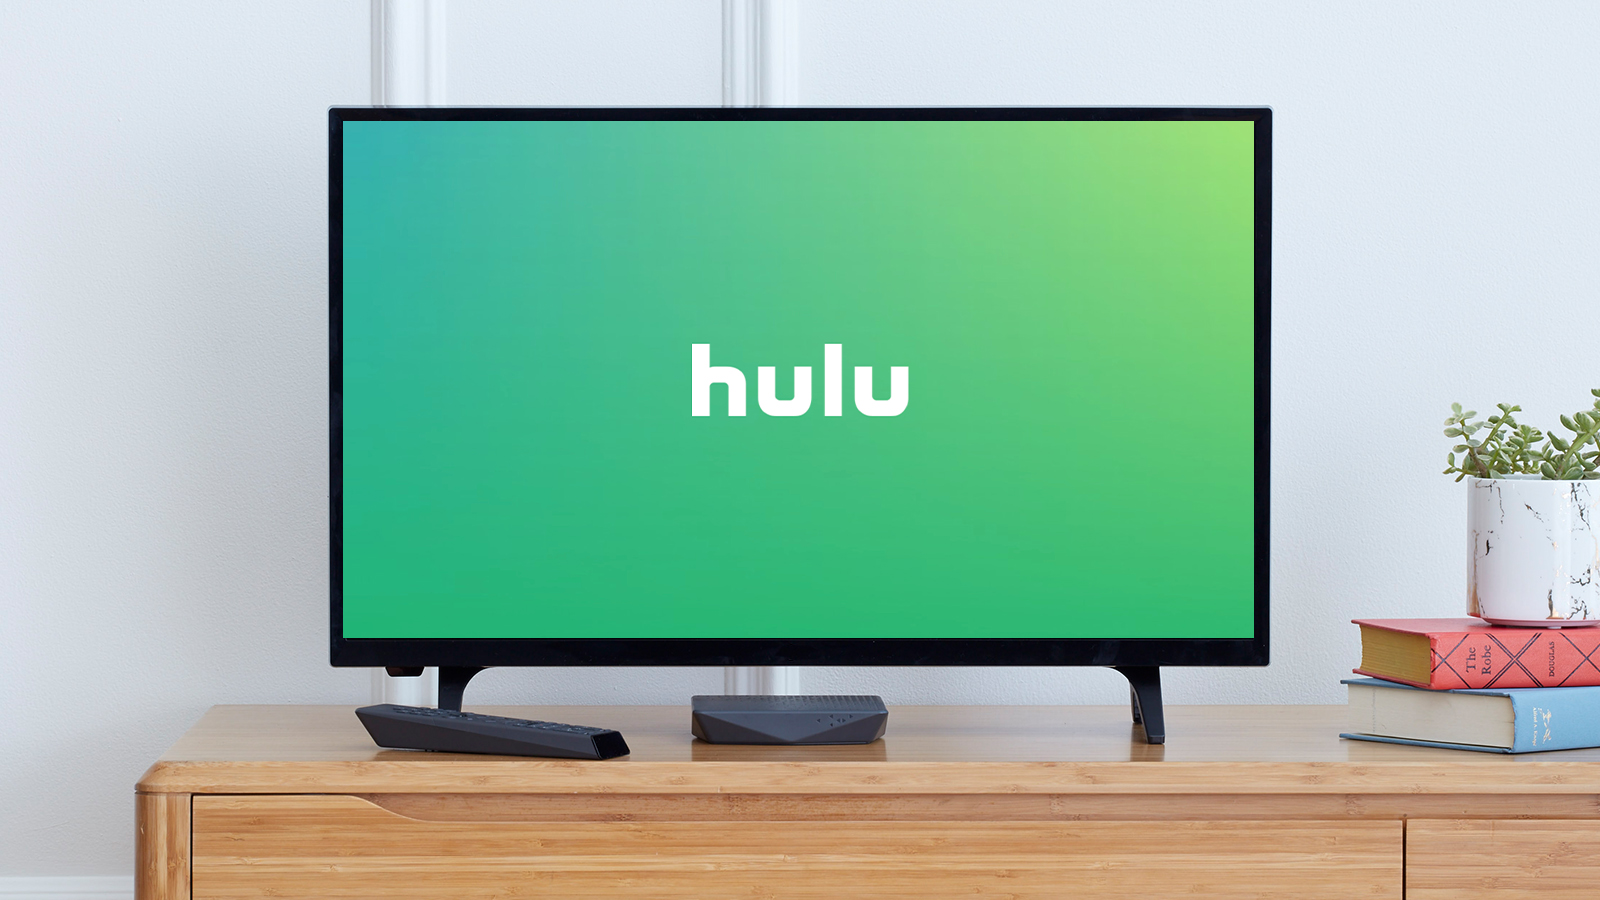 Hulu Live TV adds channels to its lineup, including PBS and Magnolia Network